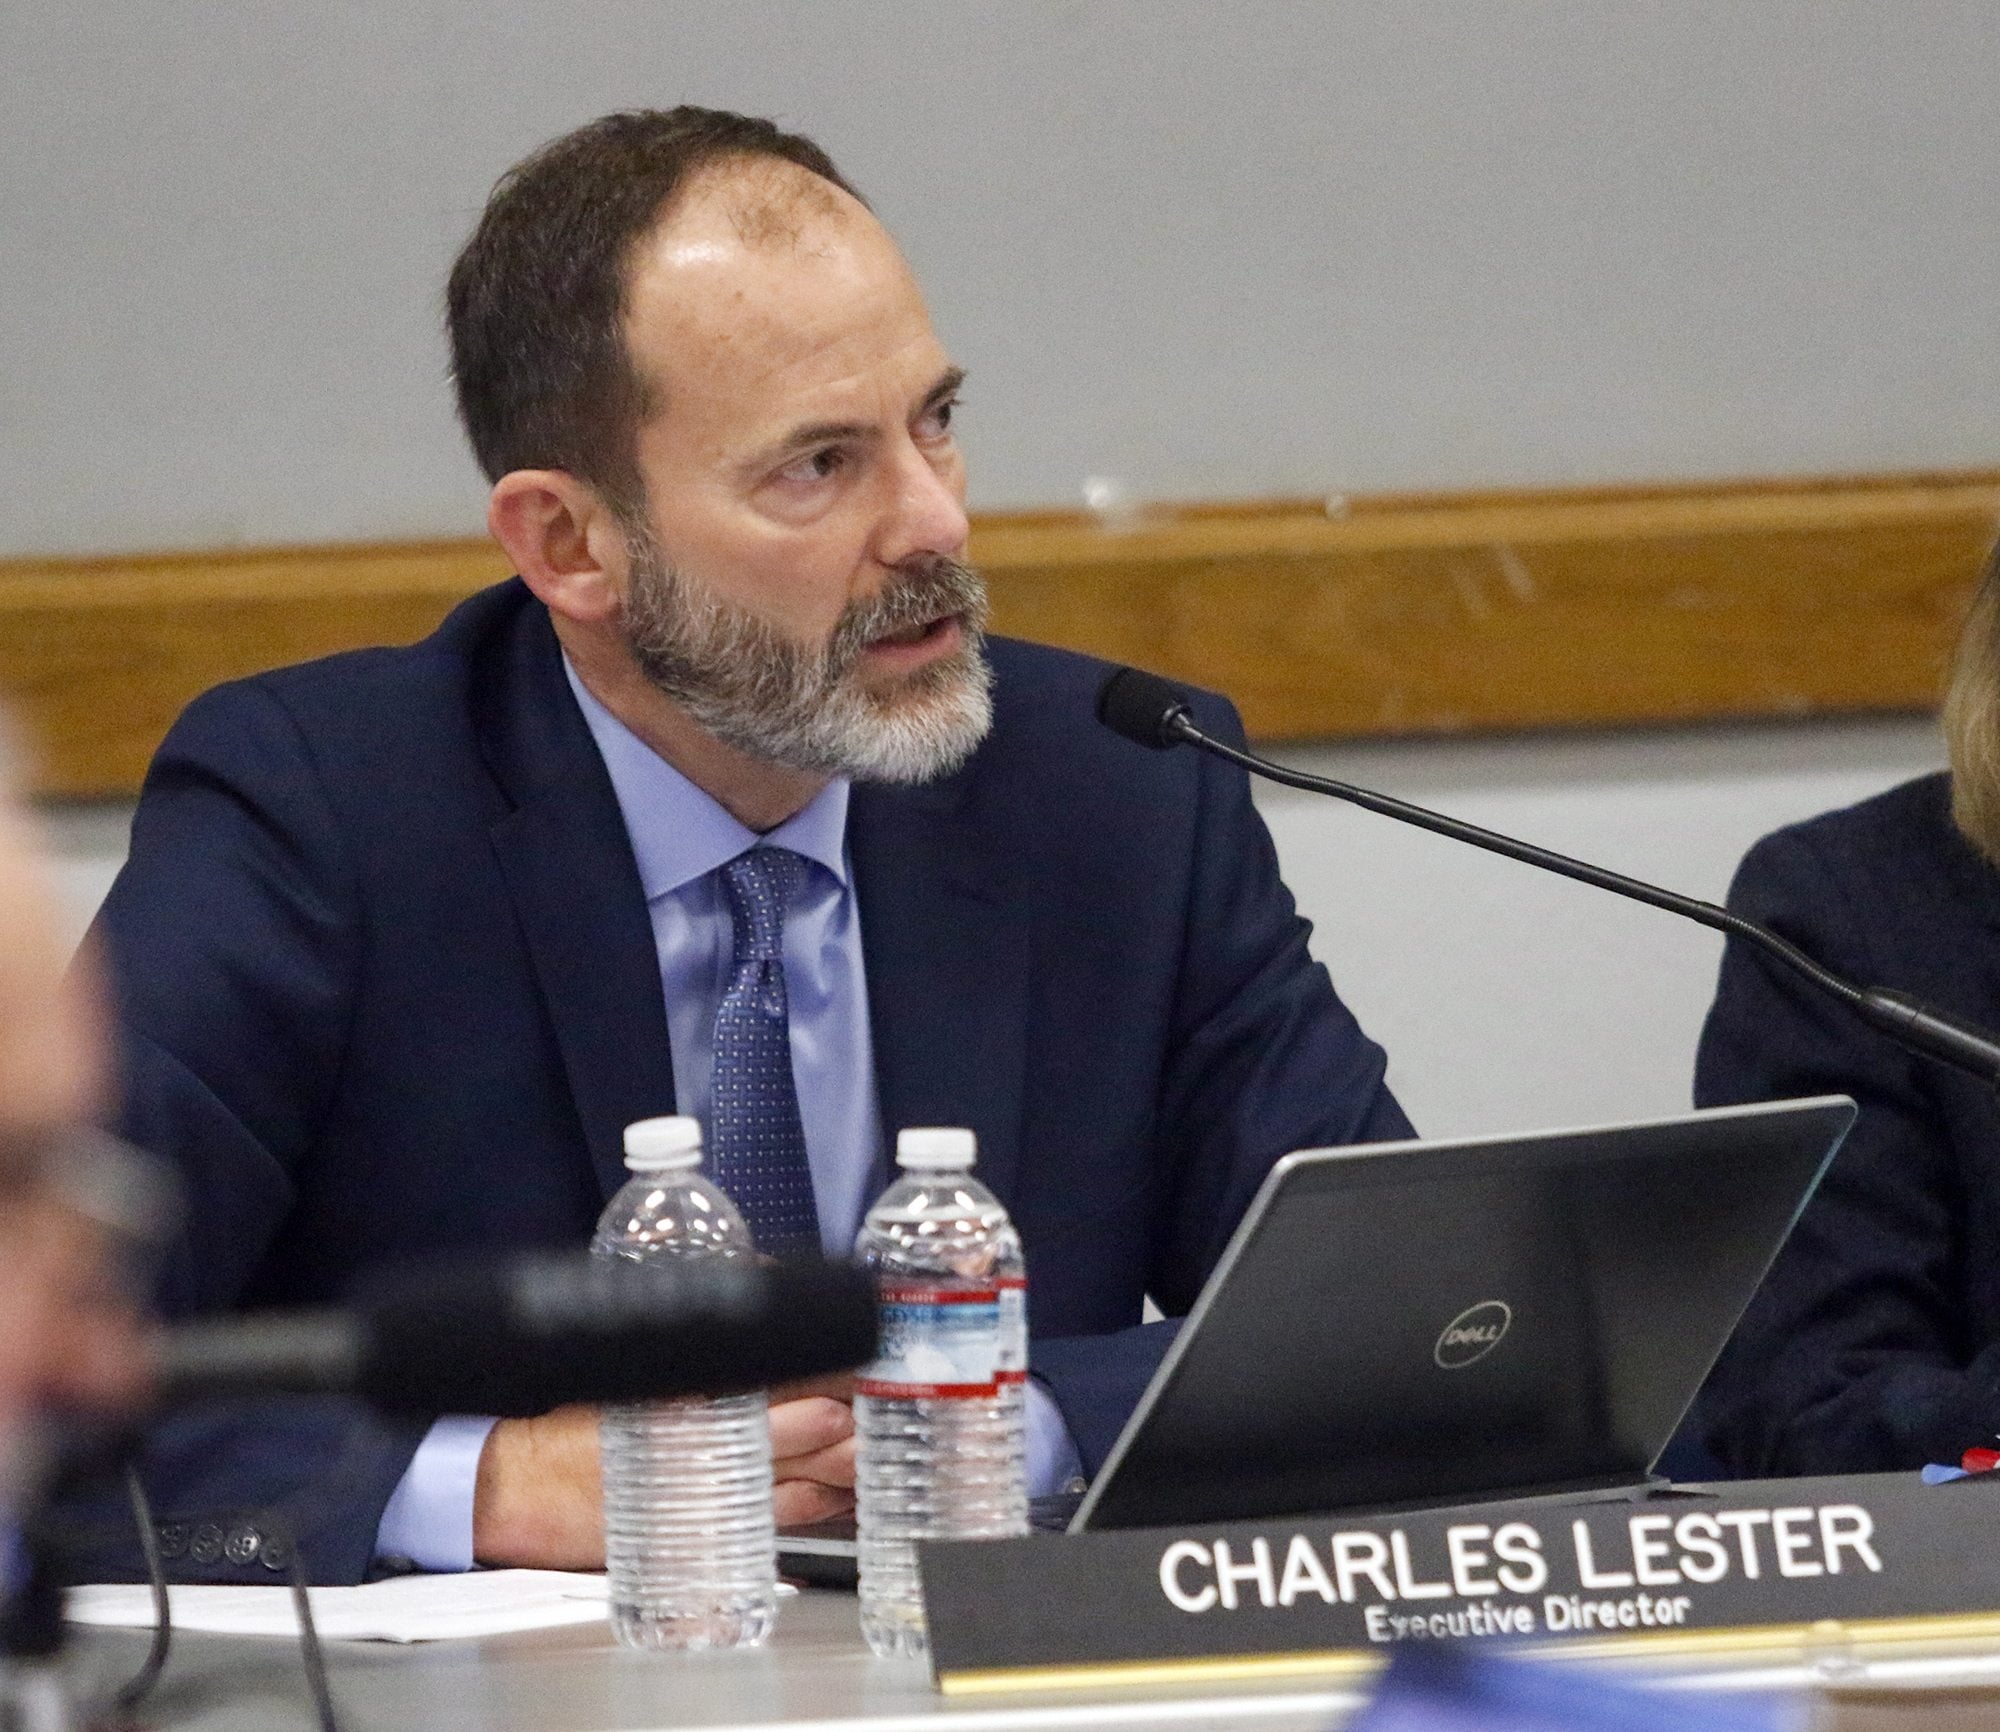 California Coastal Commission Executive Director Charles Lester speaks at a meeting of the commission in Morro Bay, Calif., Wednesday, Feb. 10, 2016. A vote on the dismissal of Lester is the first item on the agenda.